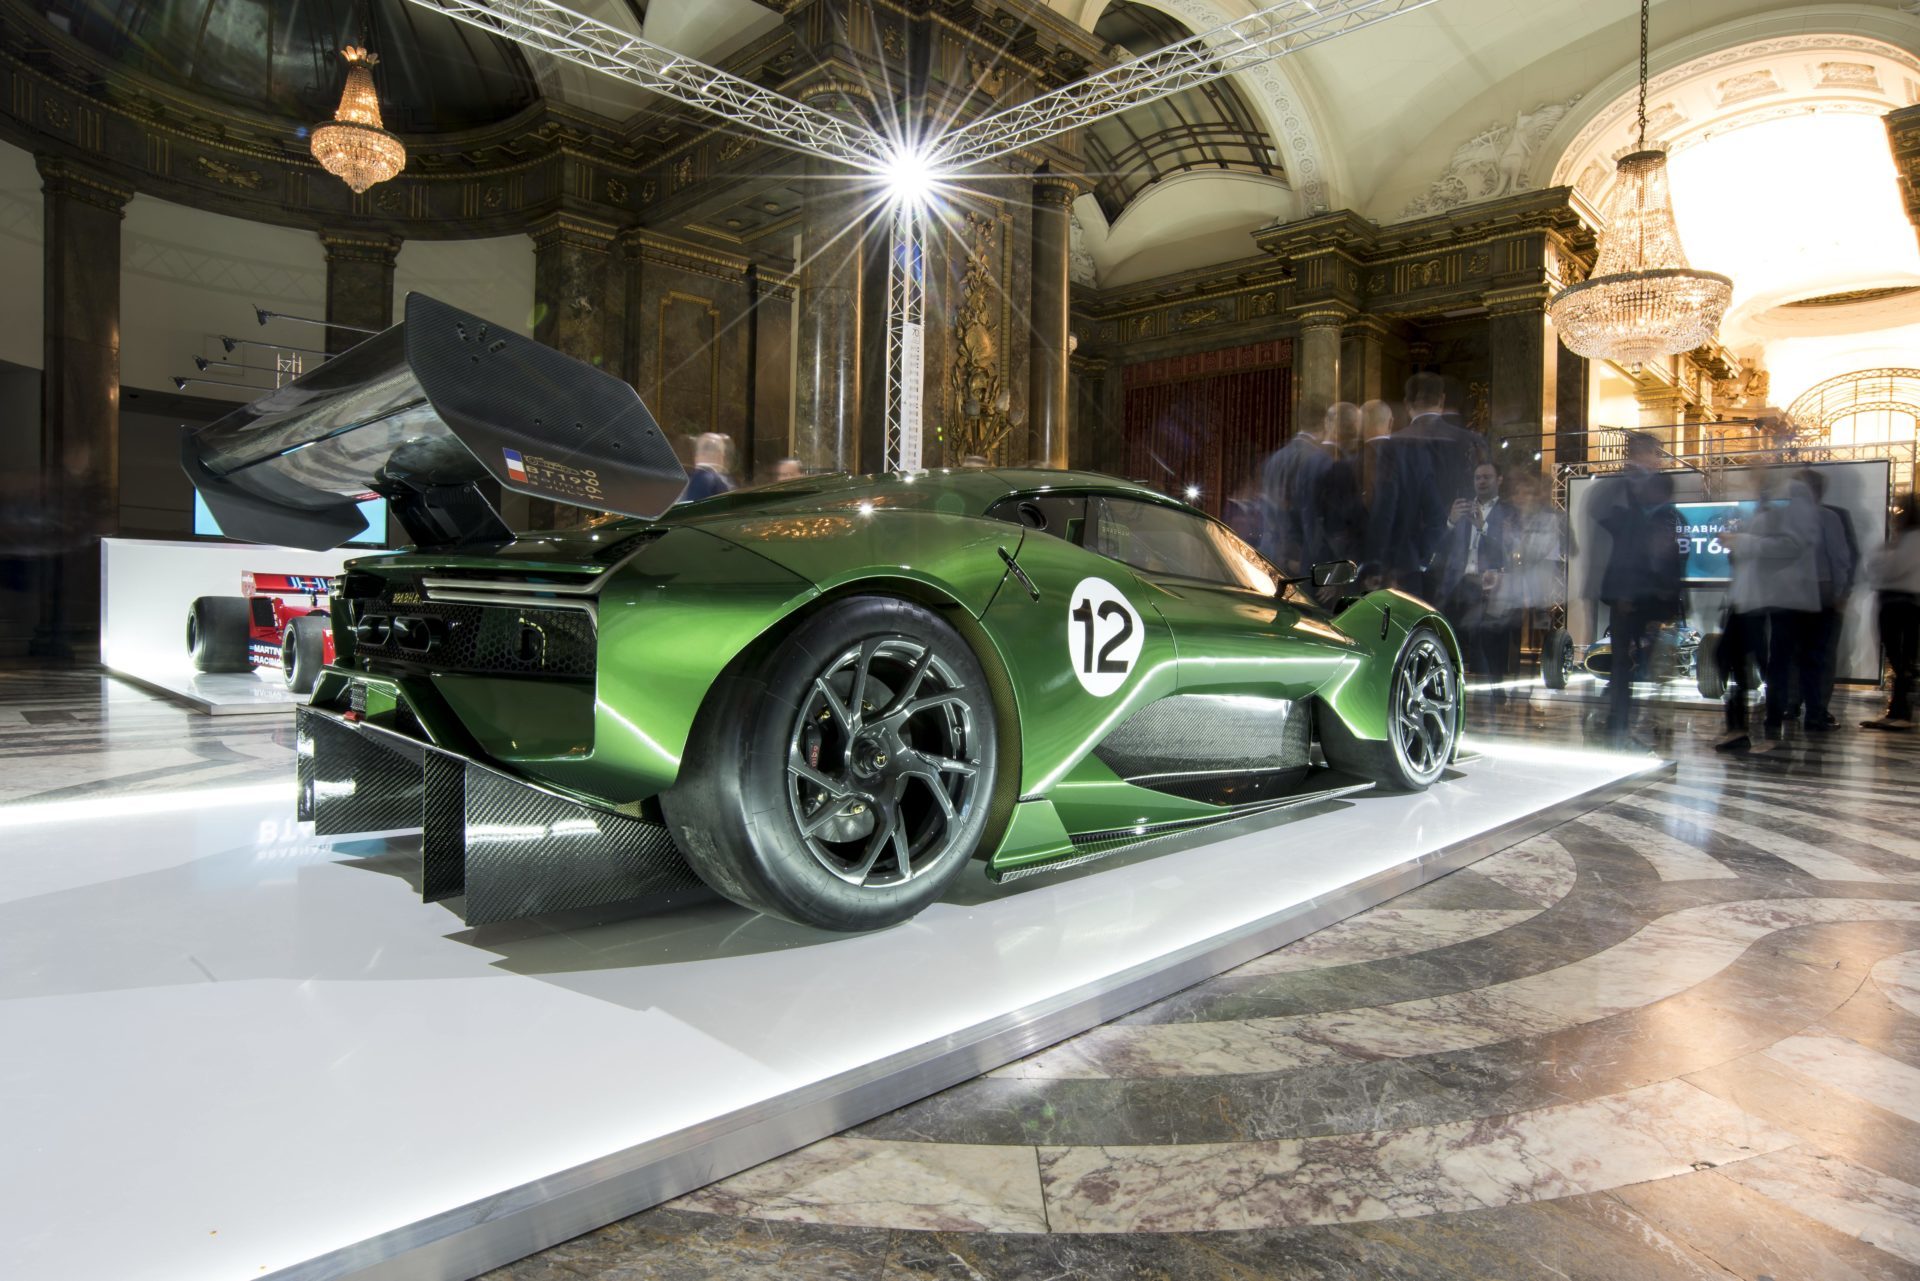 Meet the World's Newest Supercar Brand, Brabham, And Its 700hp